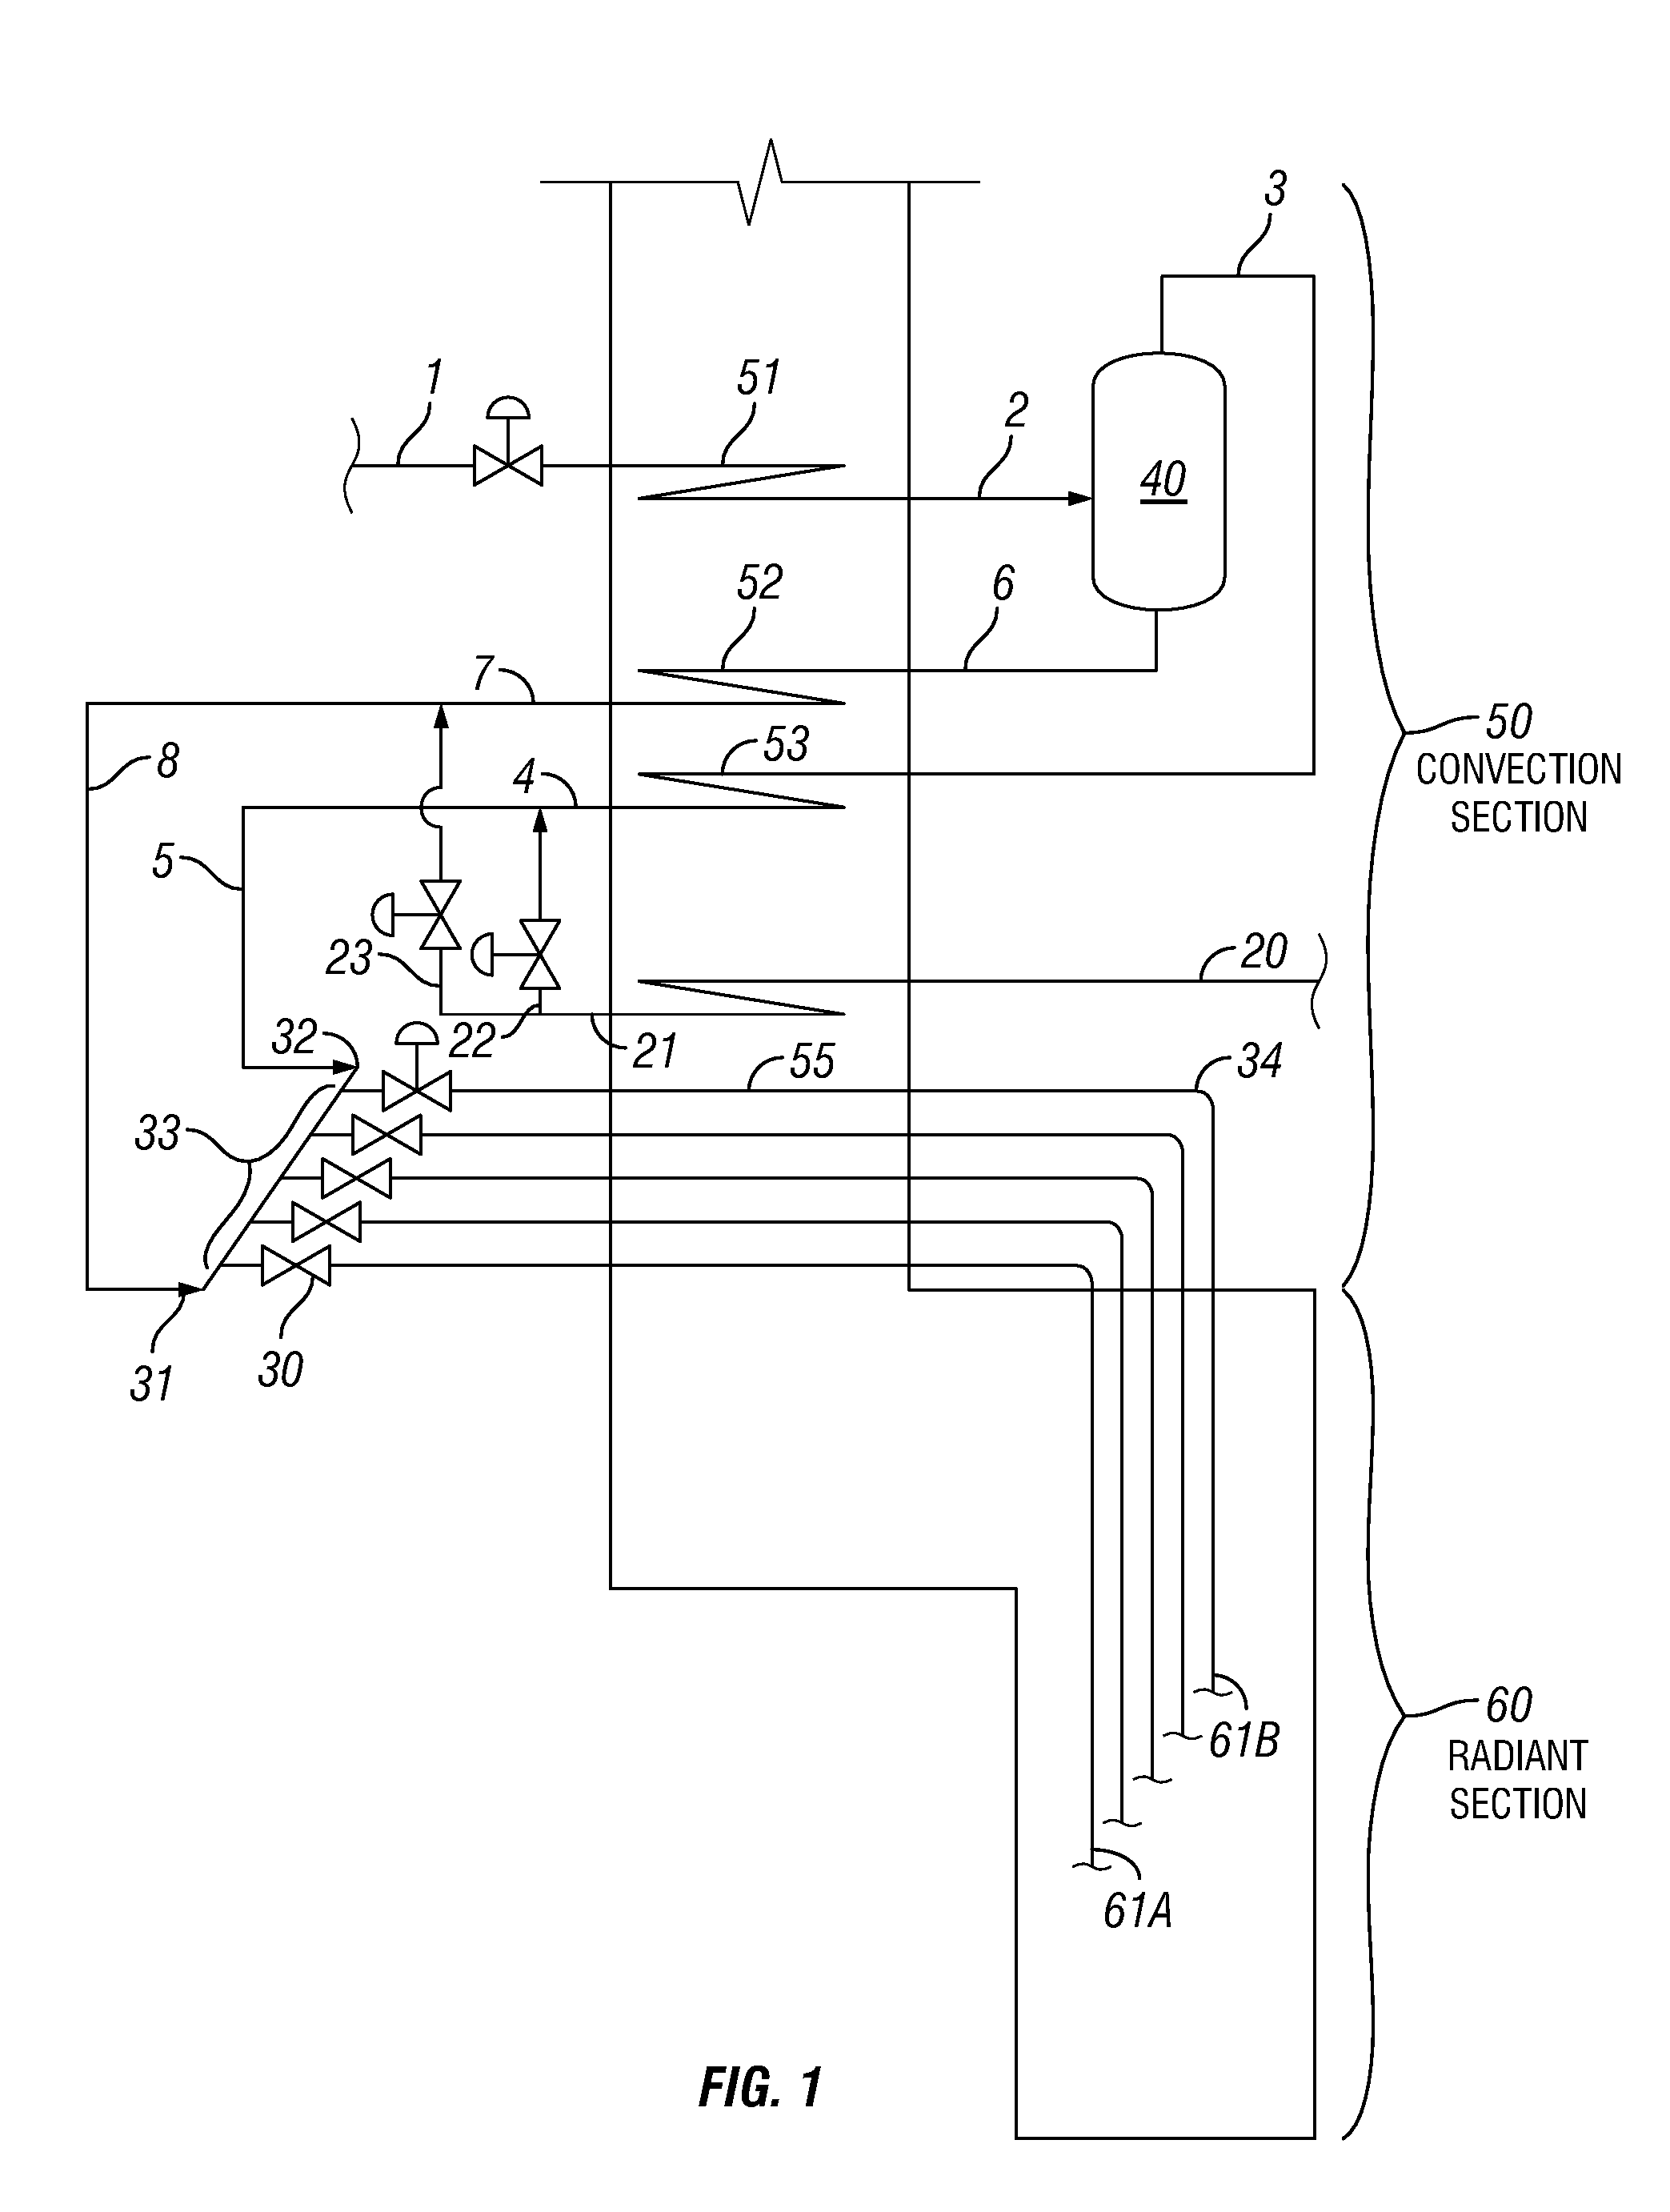 Process for producing lower olefins from hydrocarbon feedstock utilizing partial vaporization and separately controlled sets of pyrolysis coils